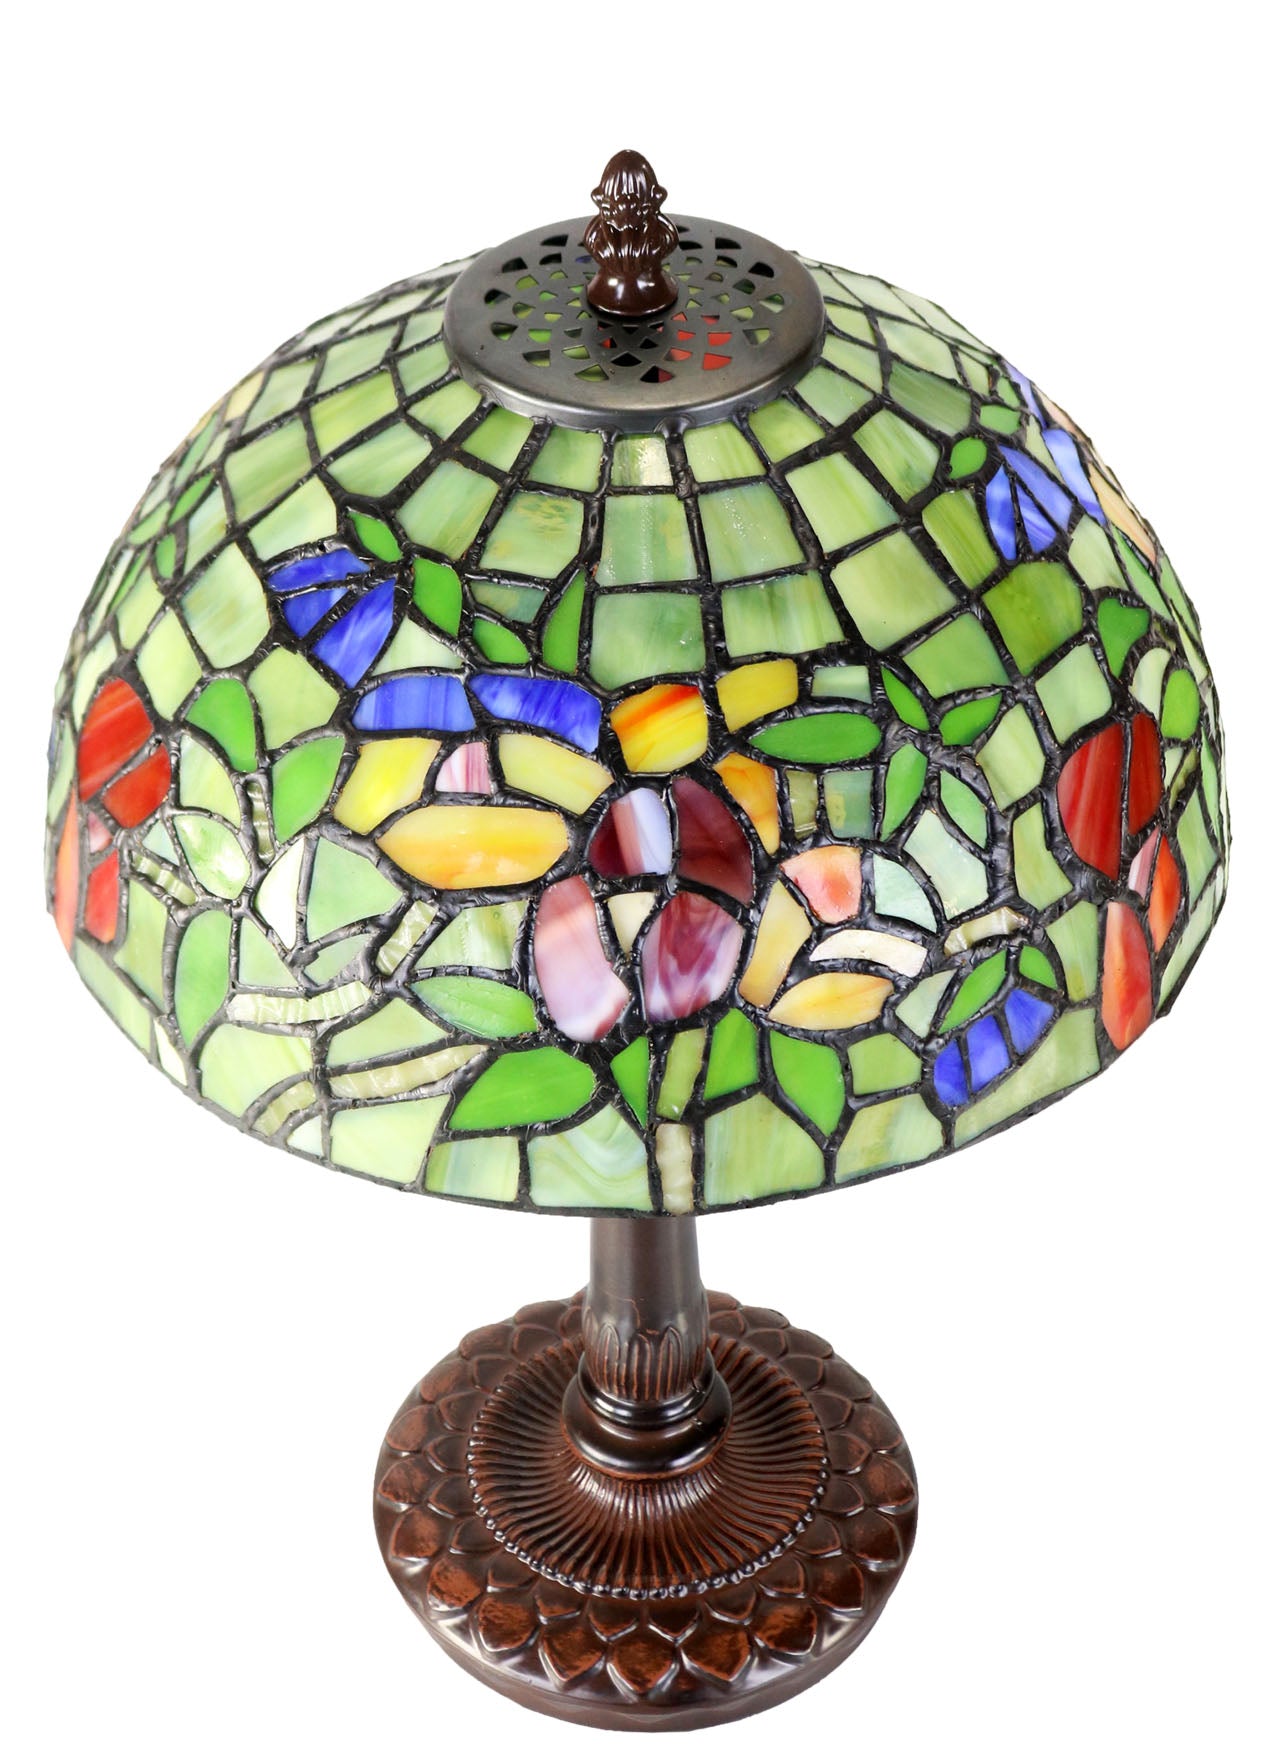 Limited Edition "Exquisite 10" @10” wide Flower Style Iris Tiffany Bedside Lamp